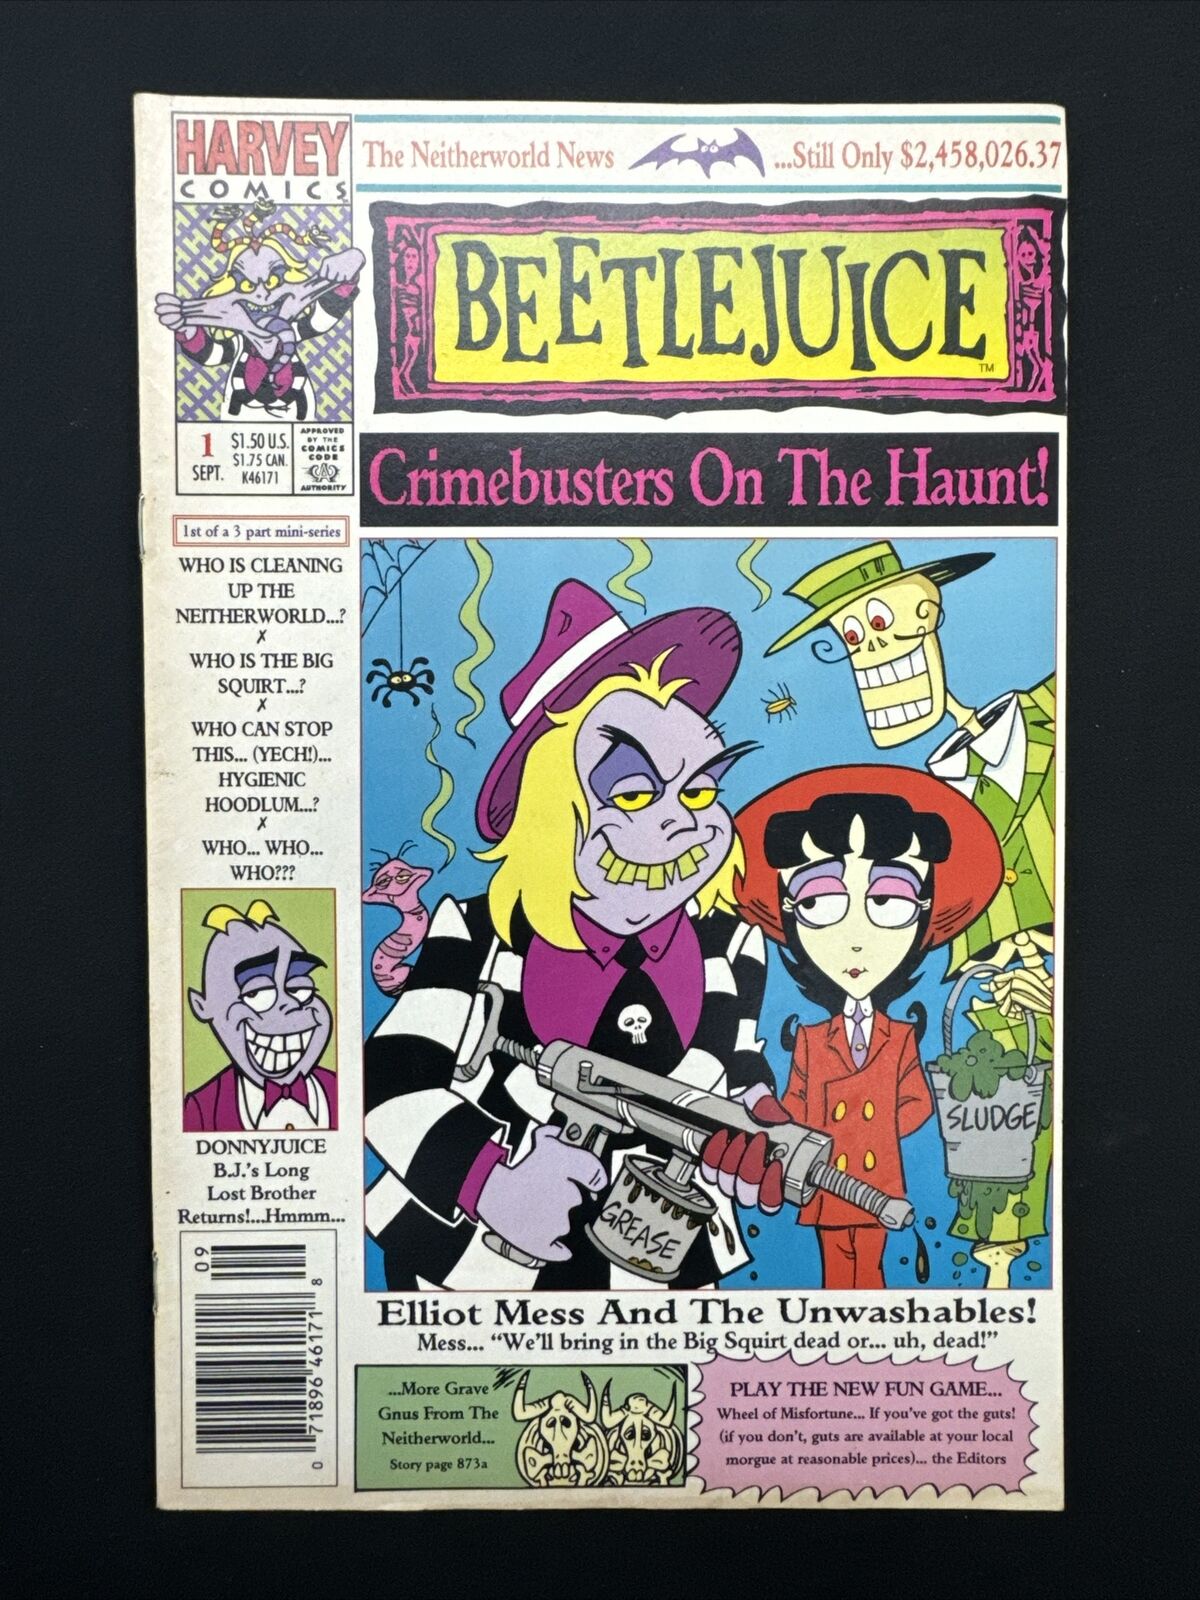 Beetlejuice: Crimebusters On The Haunt #1 Harvey Comics 1992 (Newsstand Edition)